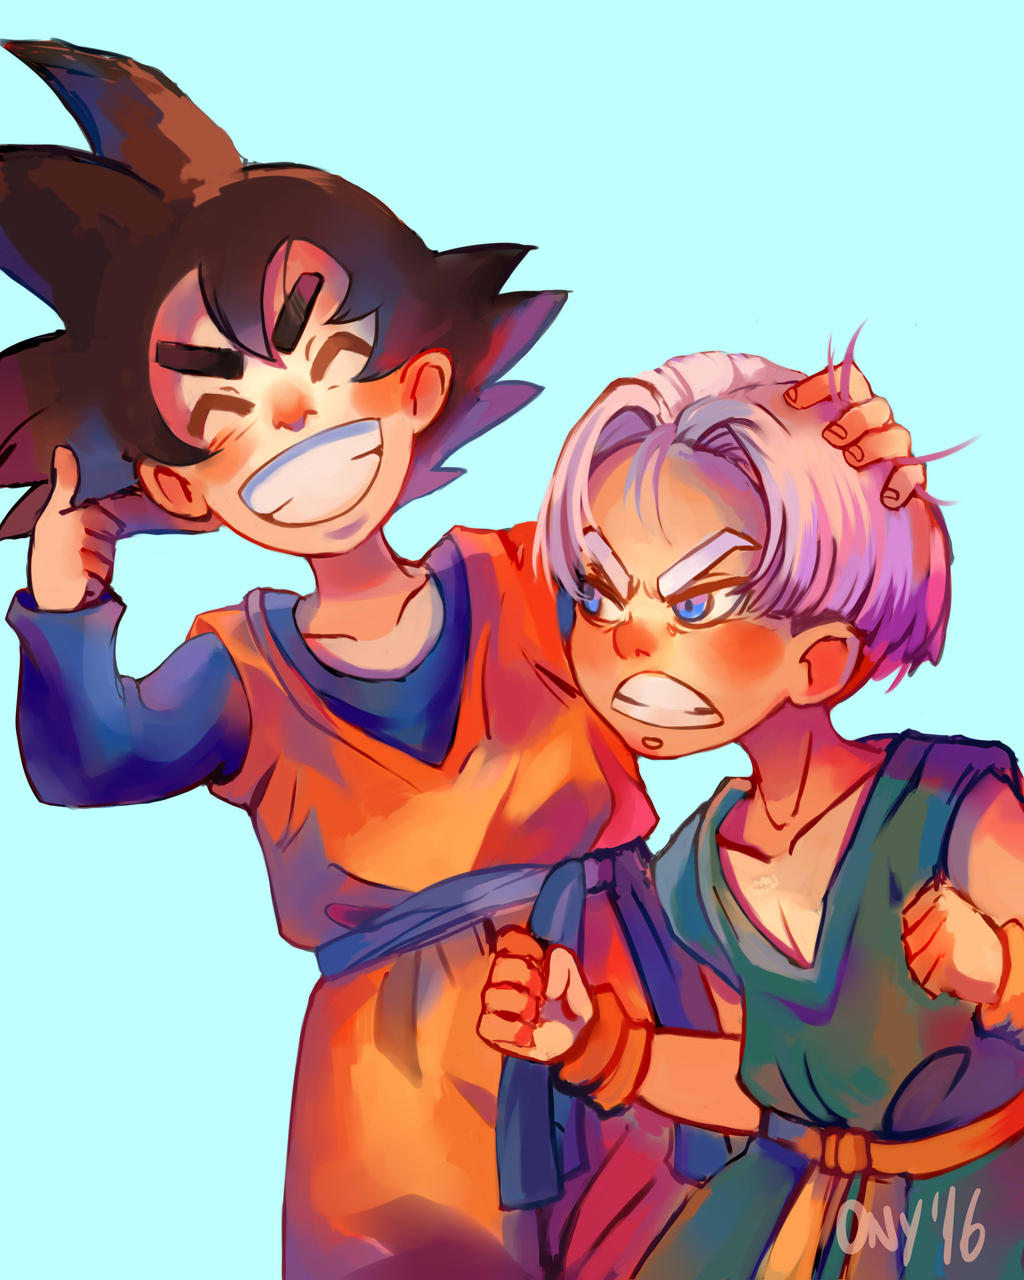 Why arent Trunks and Goten in the Multiverse Tournament.